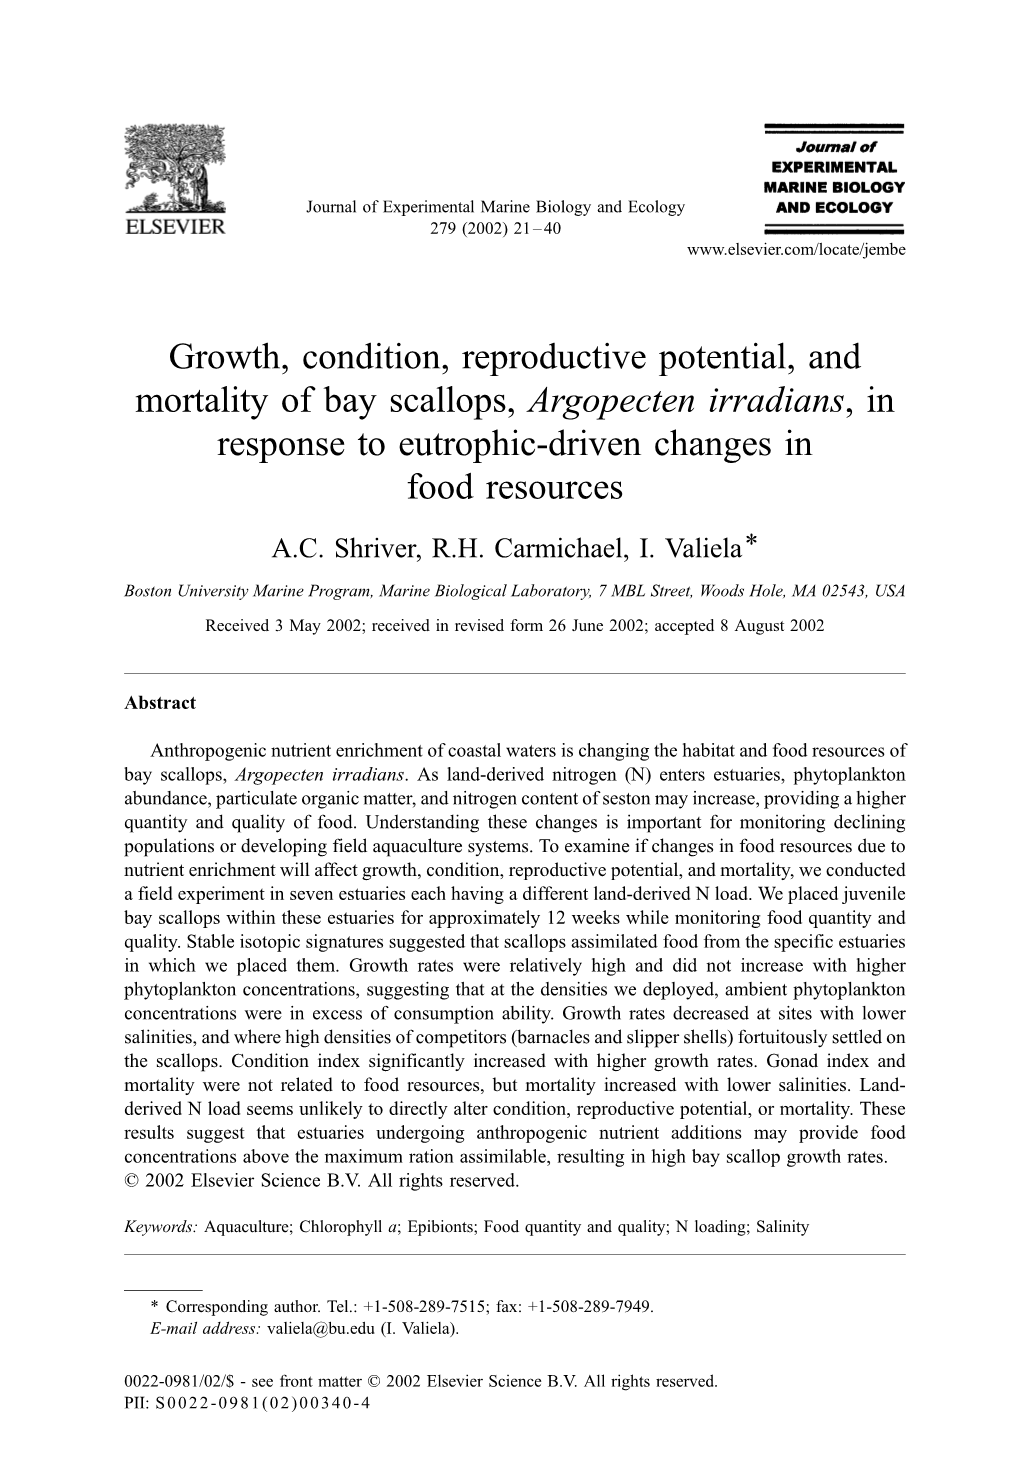 Growth, Condition, Reproductive Potential, and Mortality of Bay Scallops, Argopecten Irradians,In Response to Eutrophic-Driven Changes in Food Resources